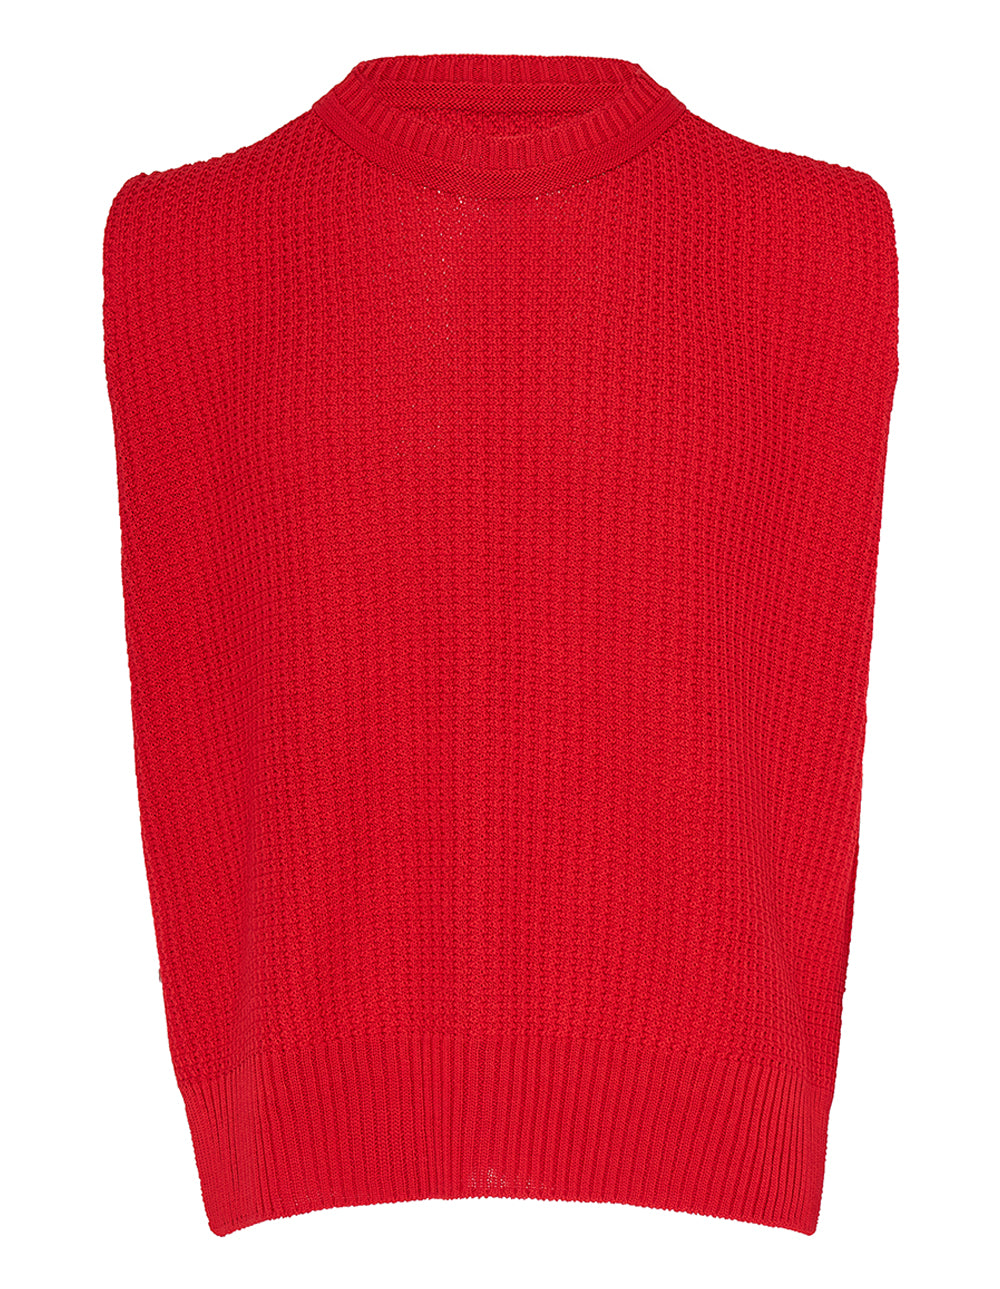 Common Knit Top